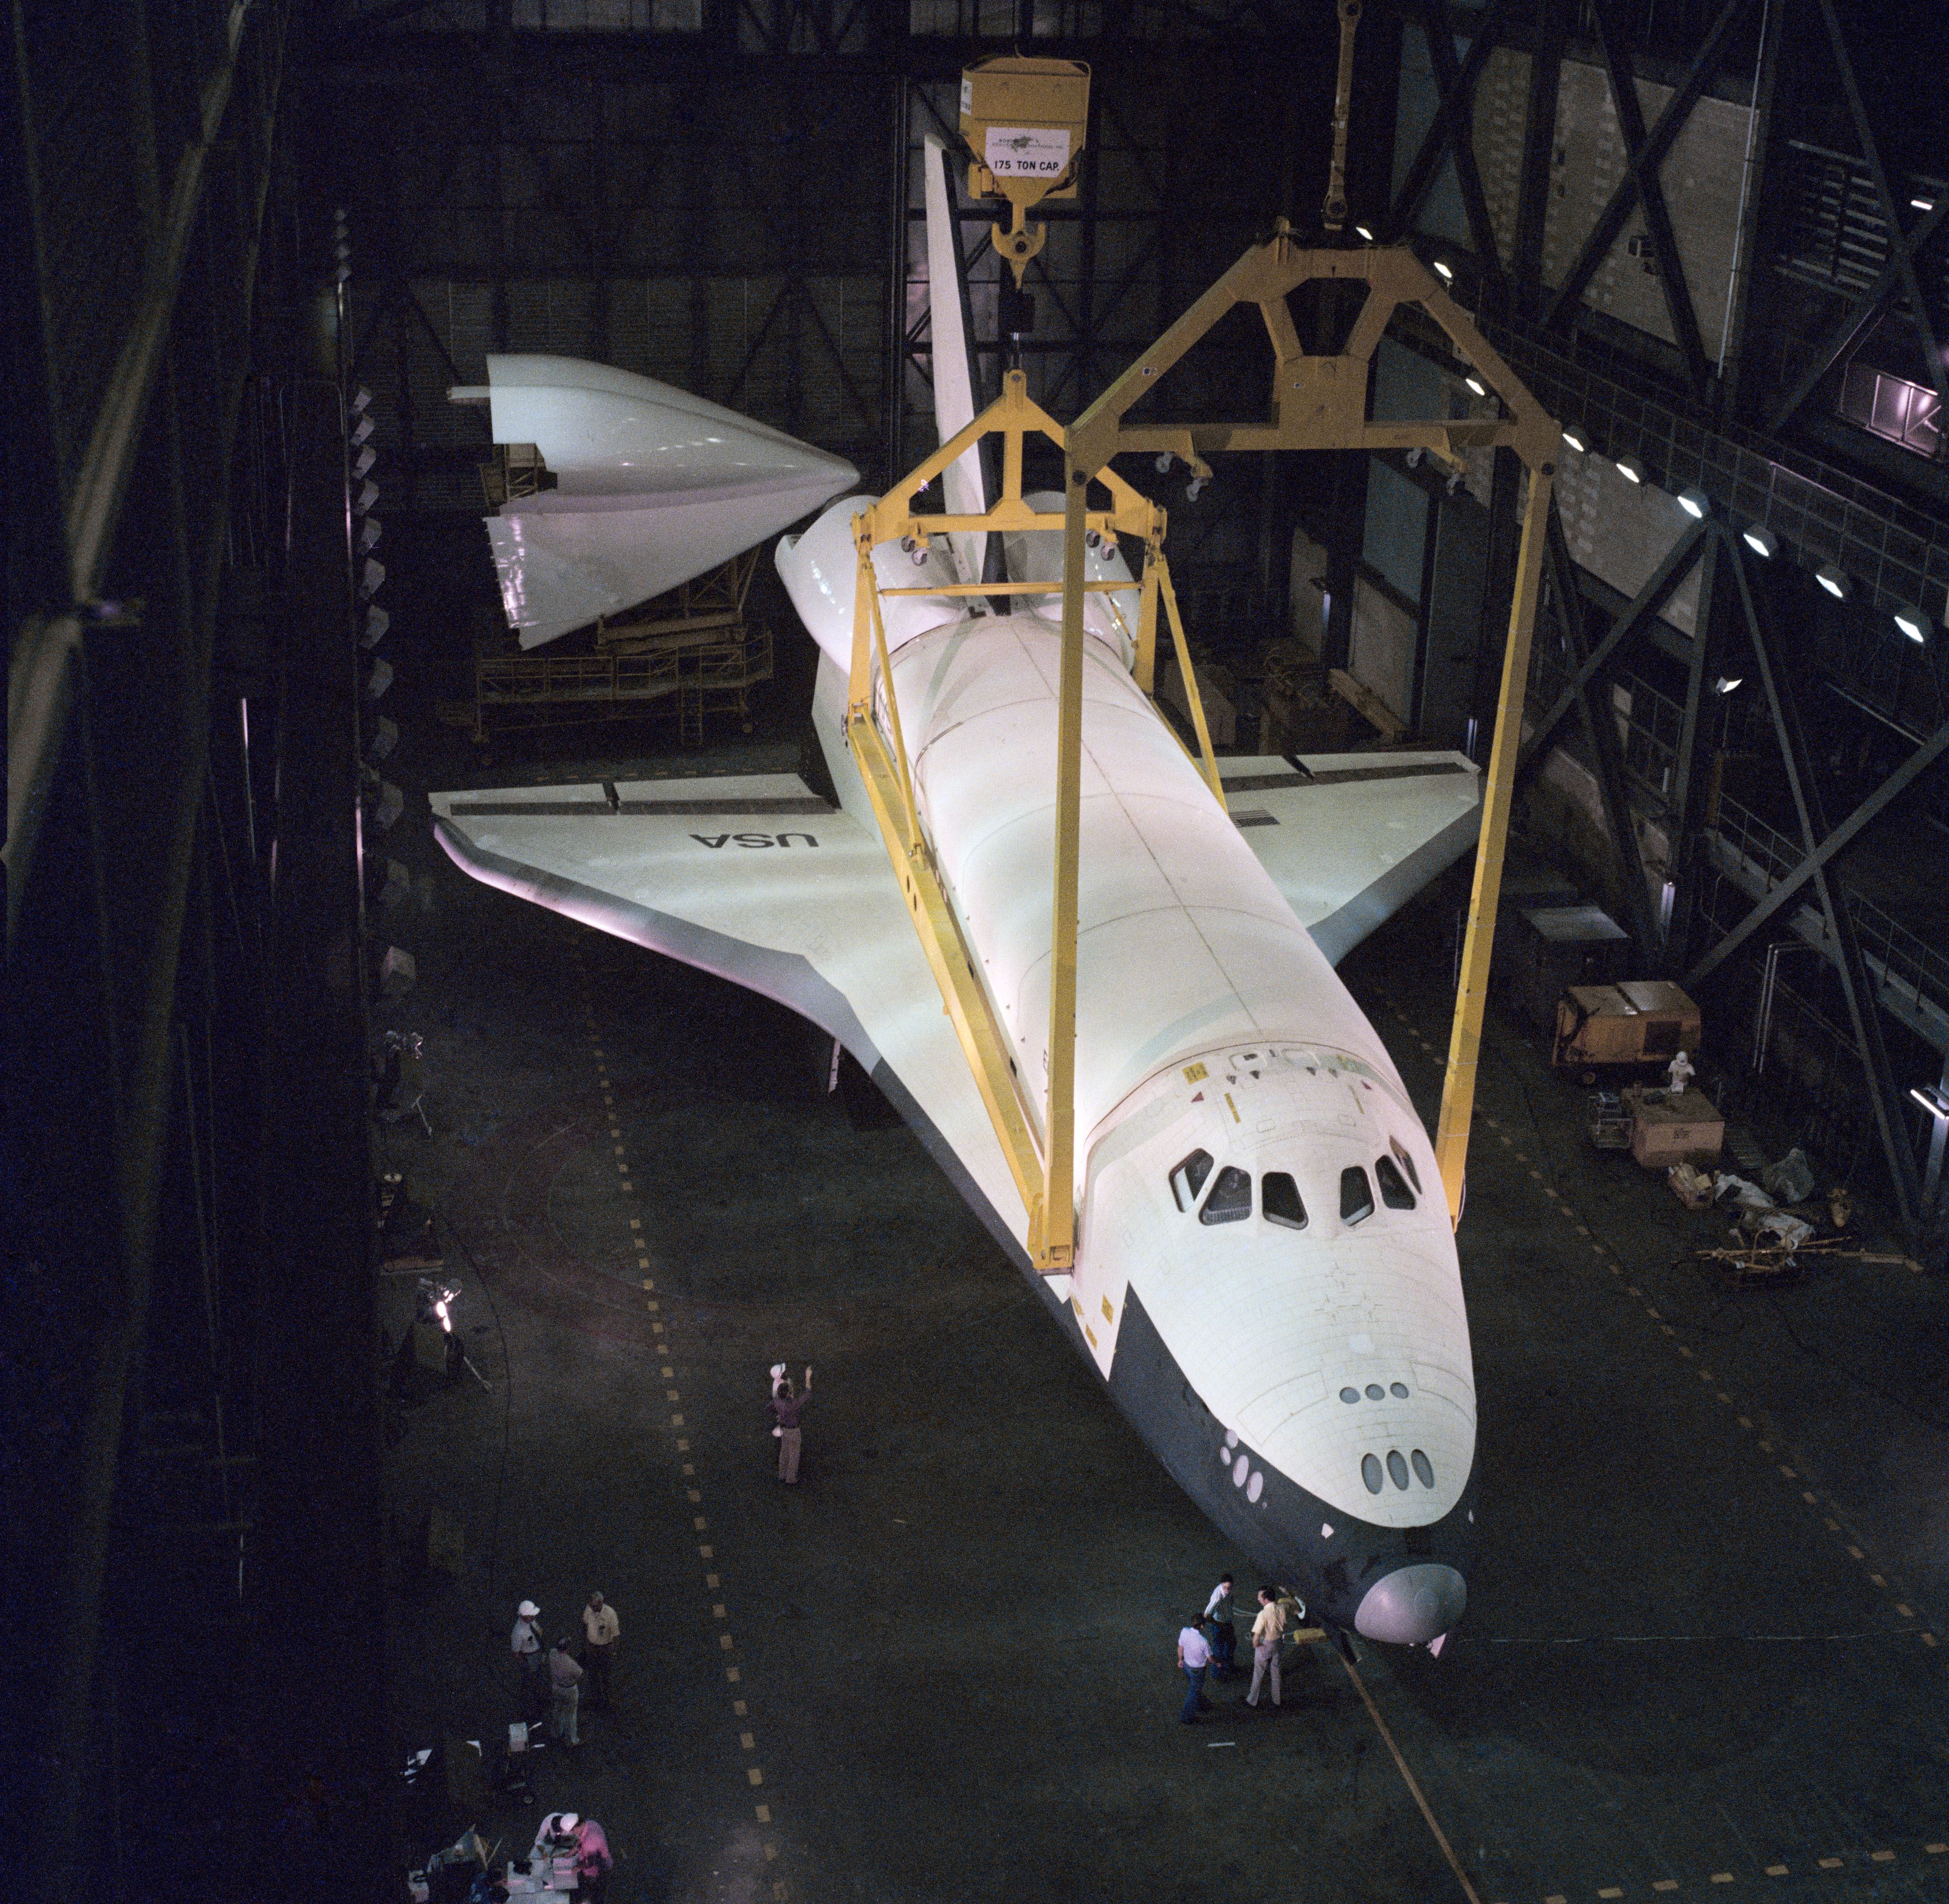 At NASA's Kennedy Space Center in Florida, workers in the Vehicle Assembly Building prepare to lift Enterprise